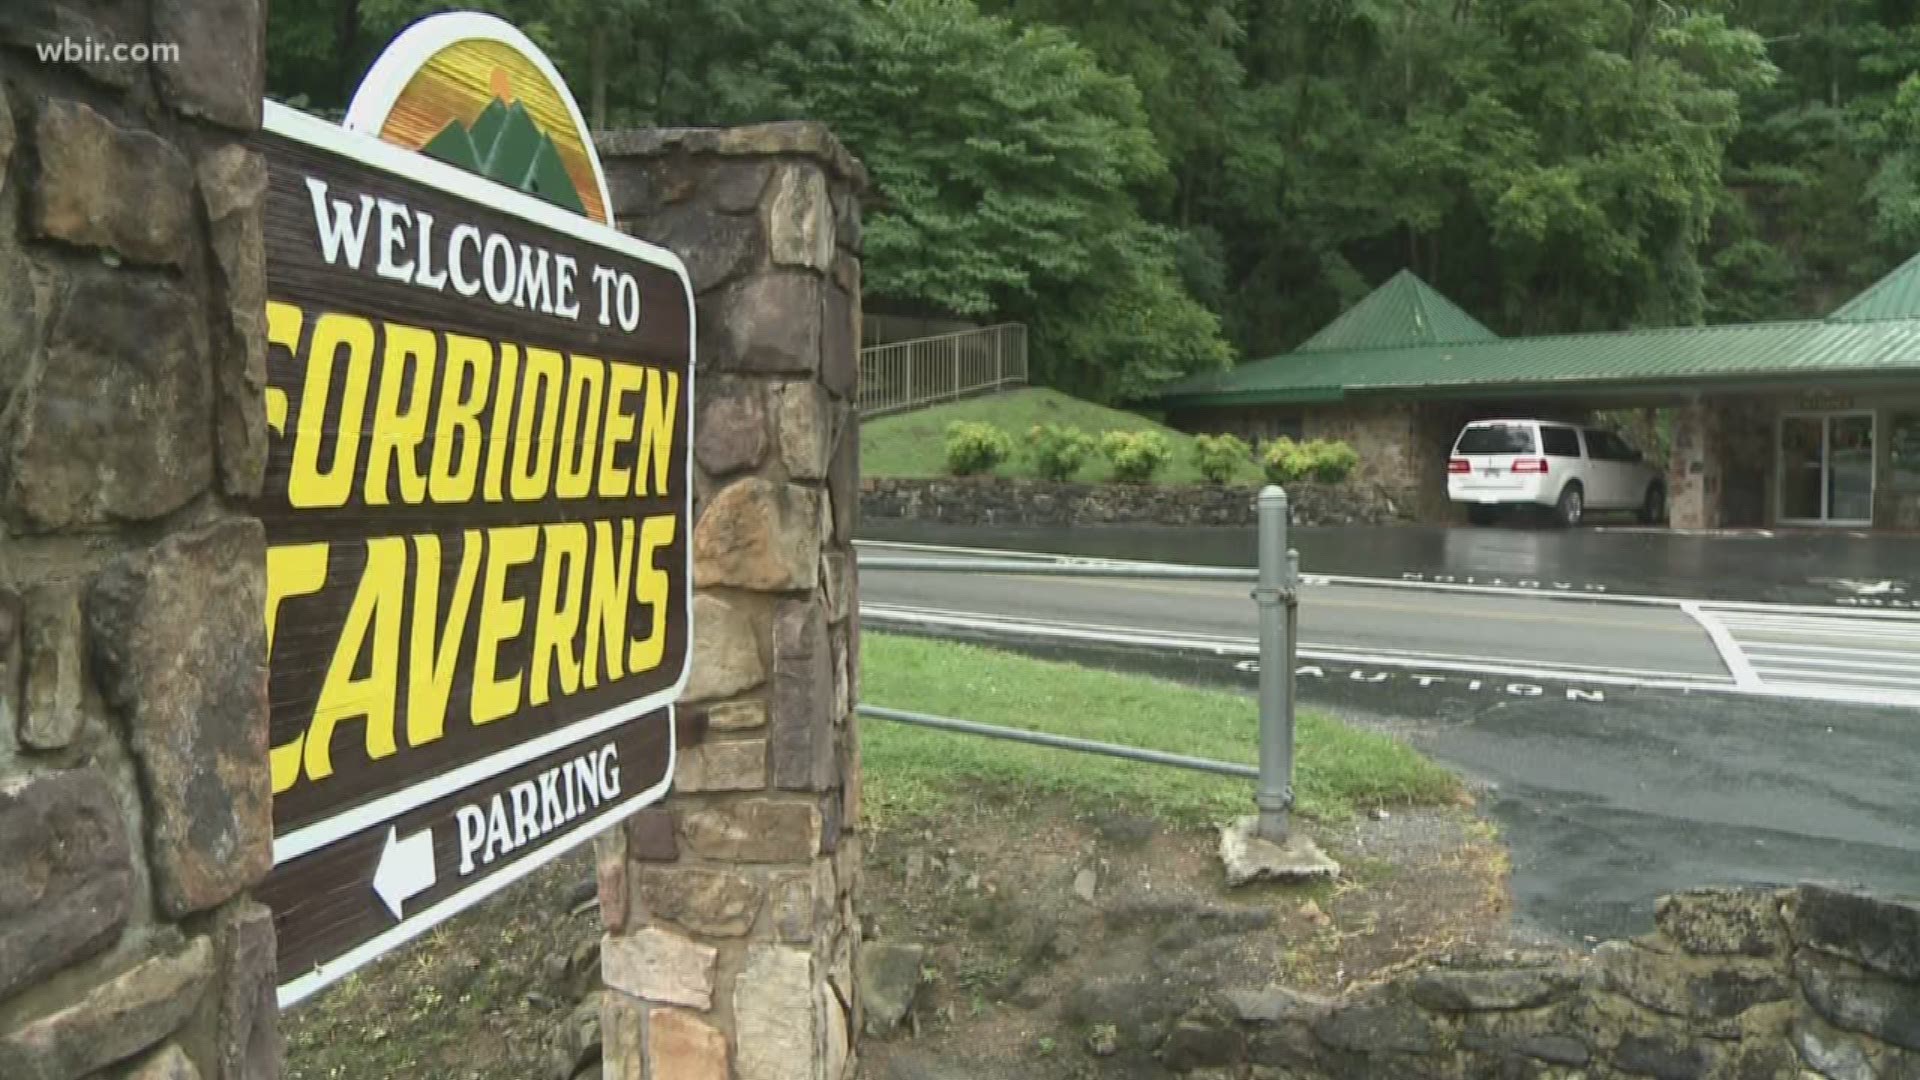 A Louisiana mom claims that her daughter with autism was not allowed on the cave tour, and the post has set off a firestorm of comments. Forbidden Caverns says everyone is welcome.